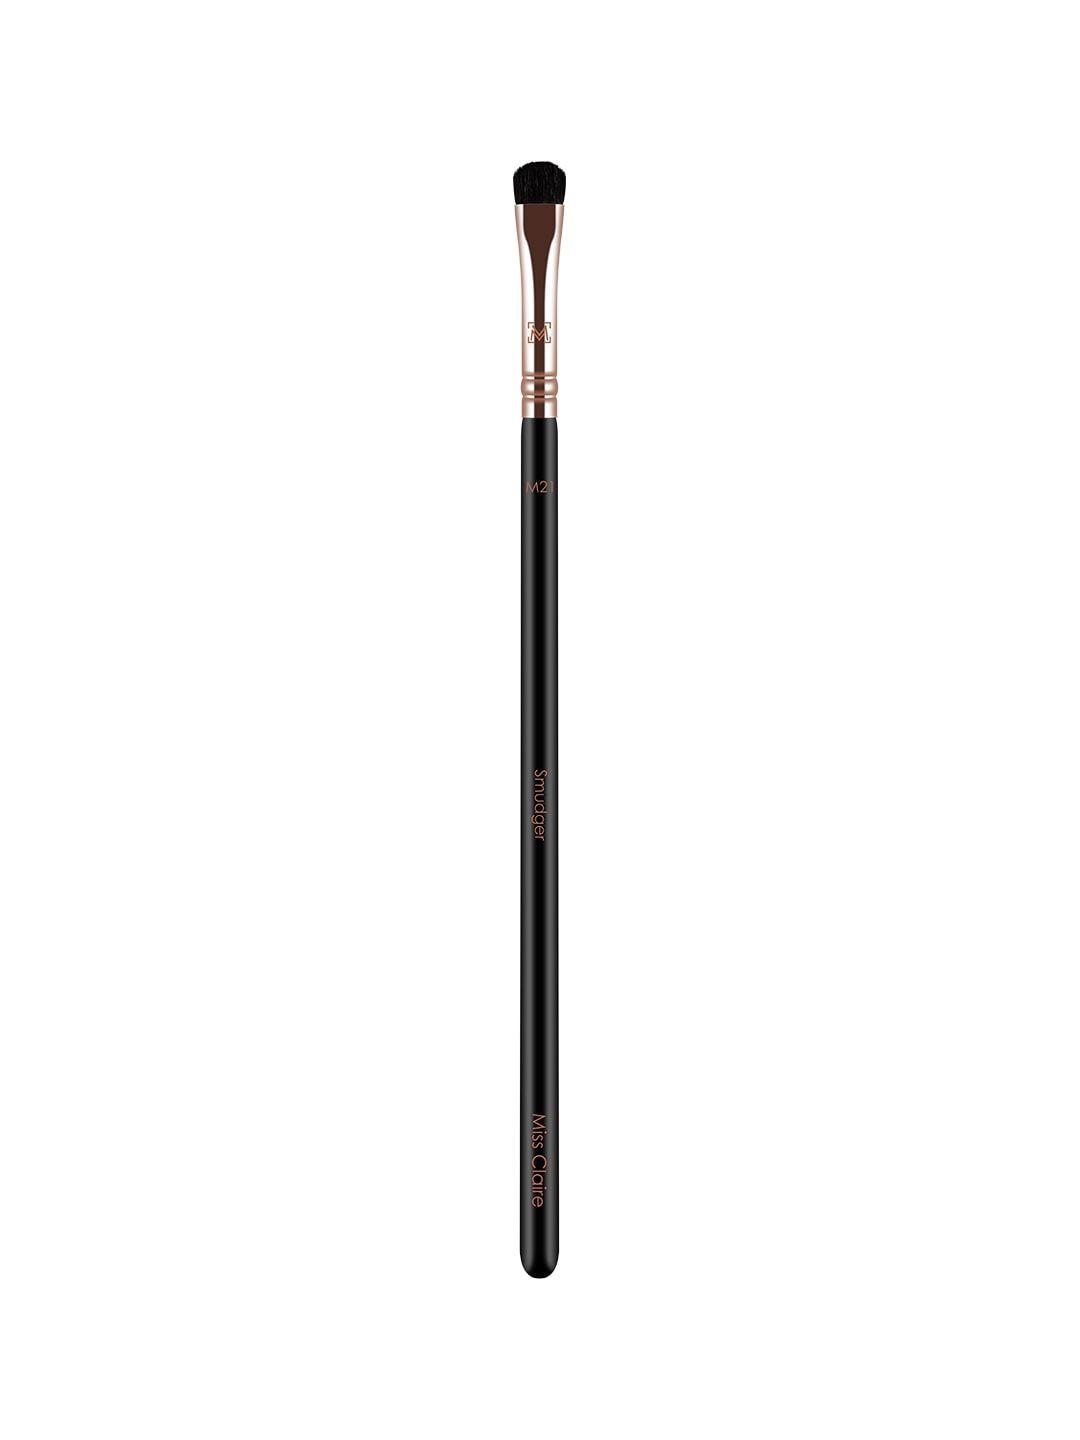 miss claire m21 - smudger eye brush - rose gold-toned & black